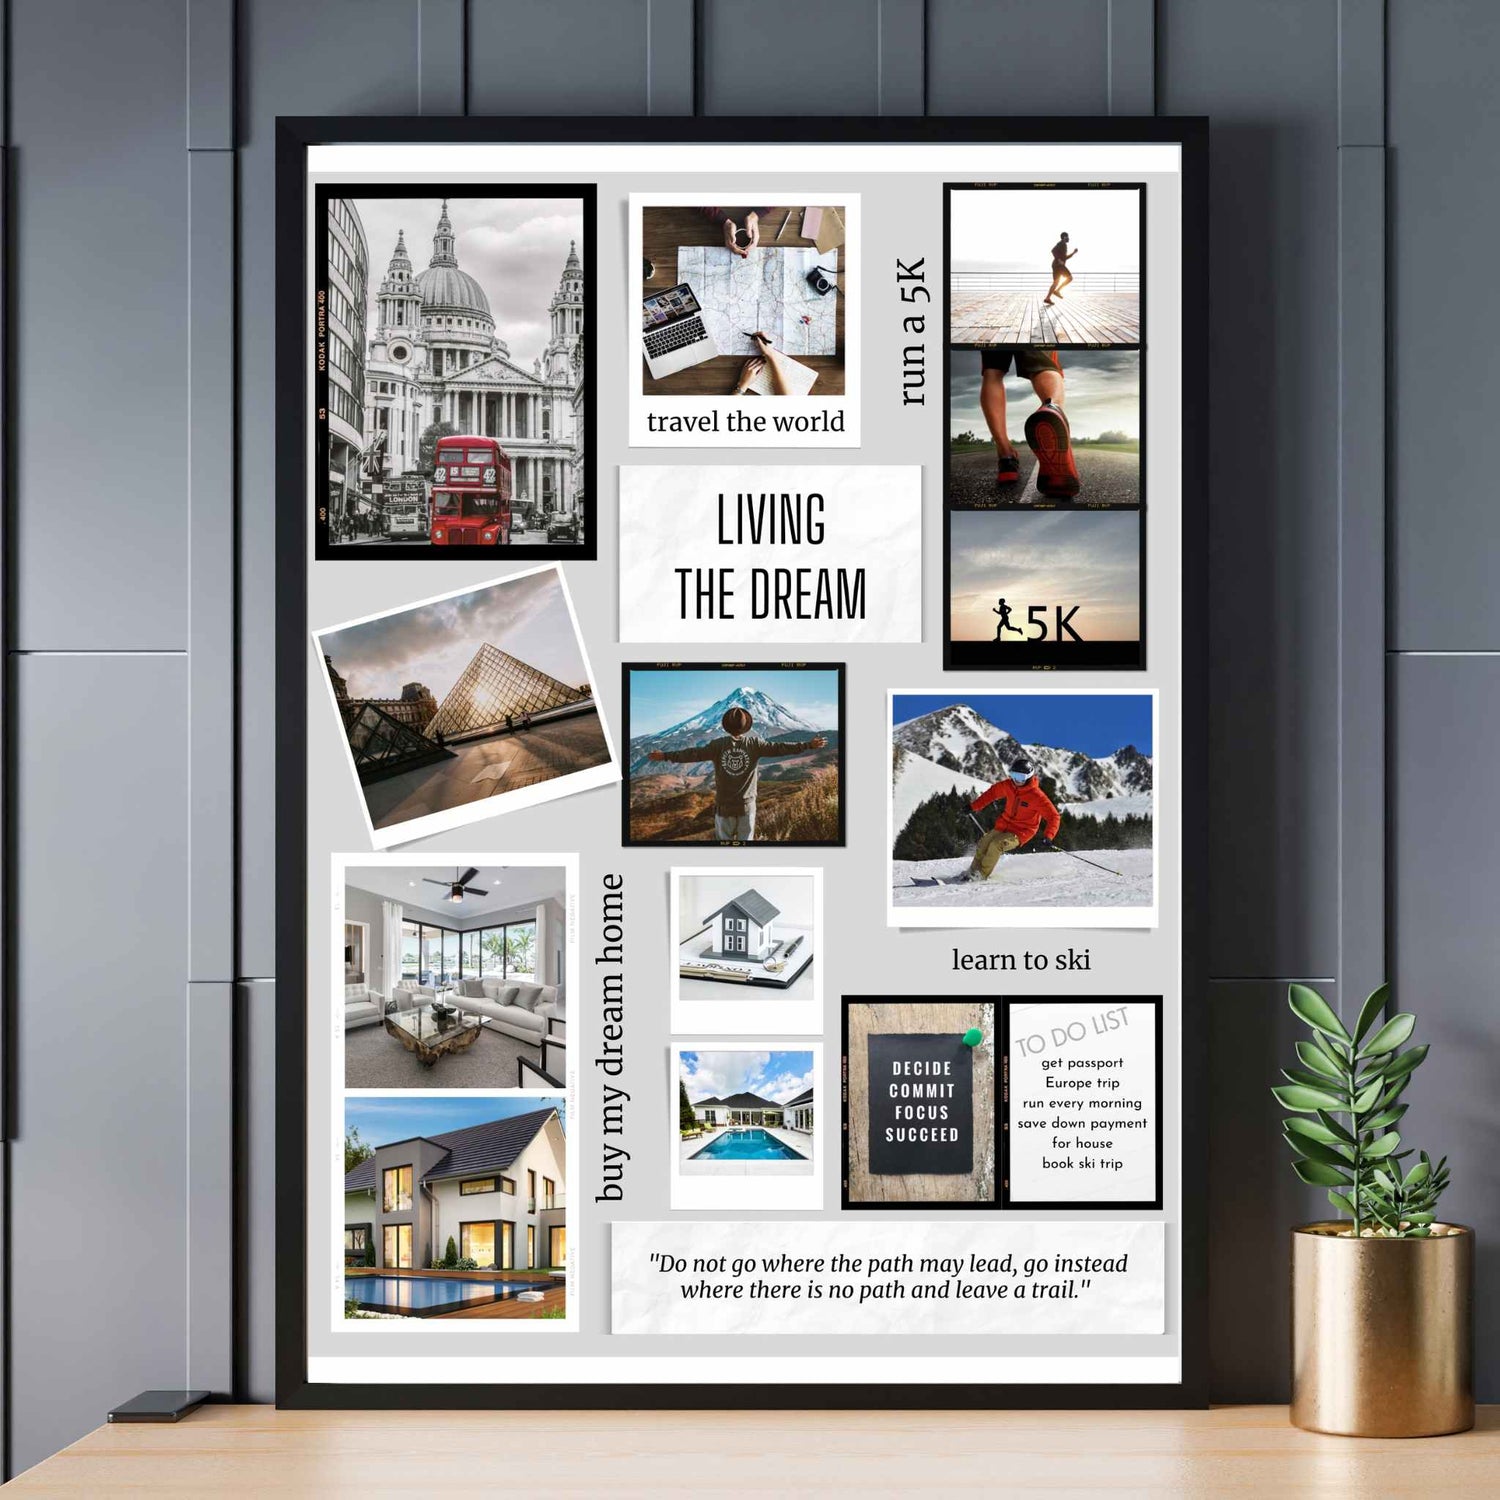 Scrapbook vision board design in frame on wall